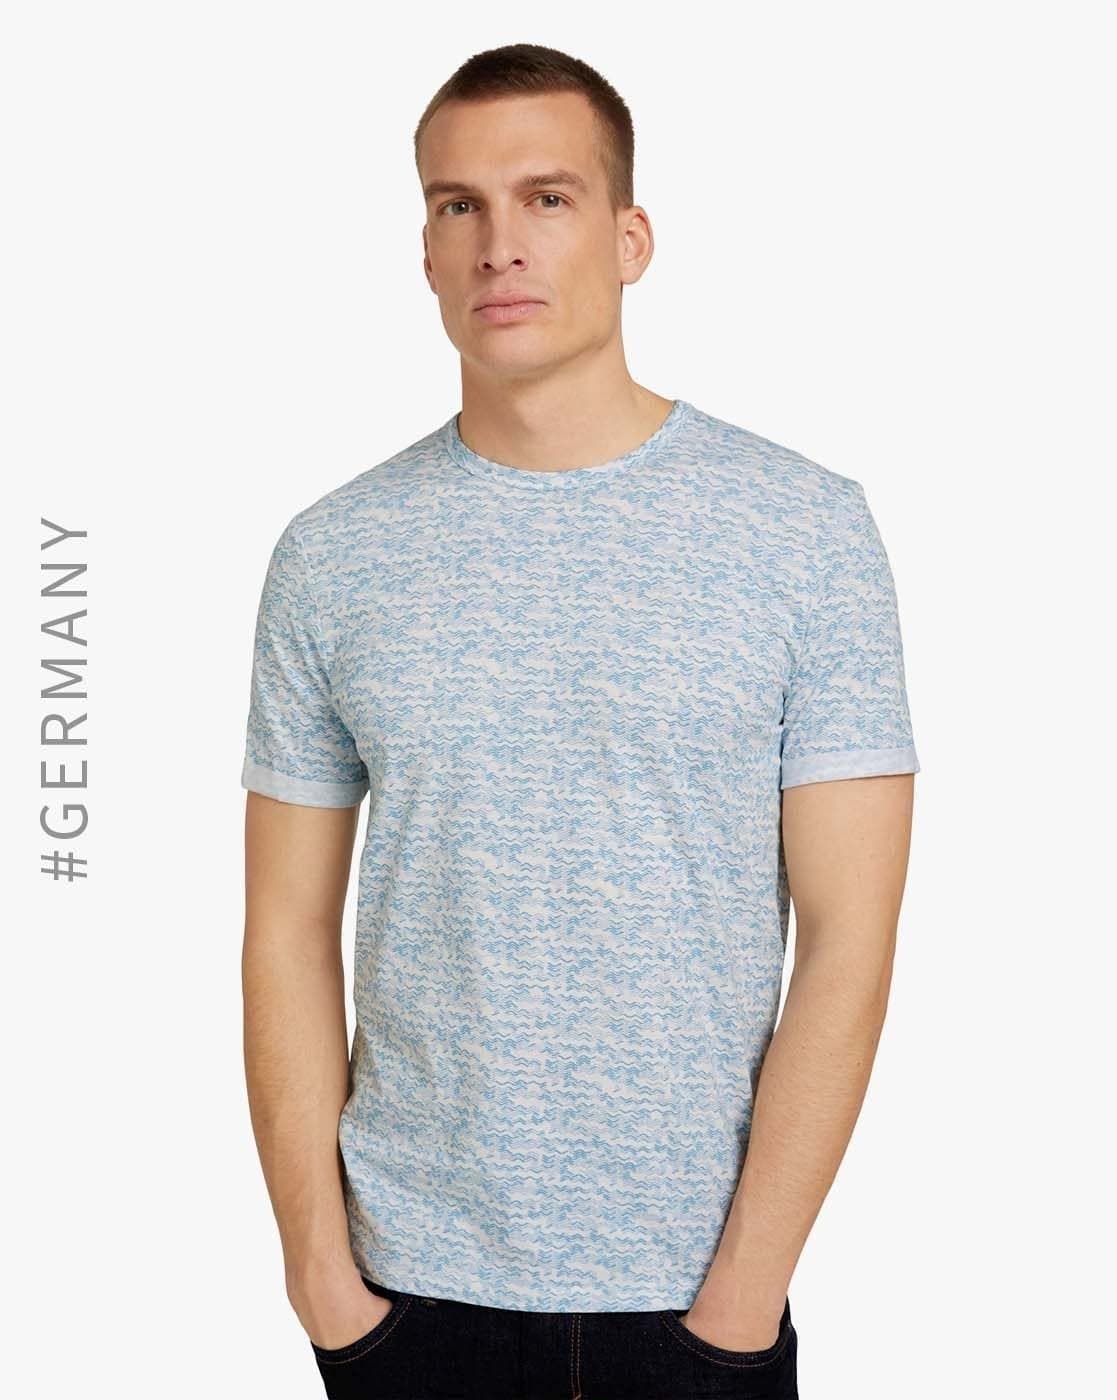 Tailor Tom Online Buy Tshirts Blue by for Men